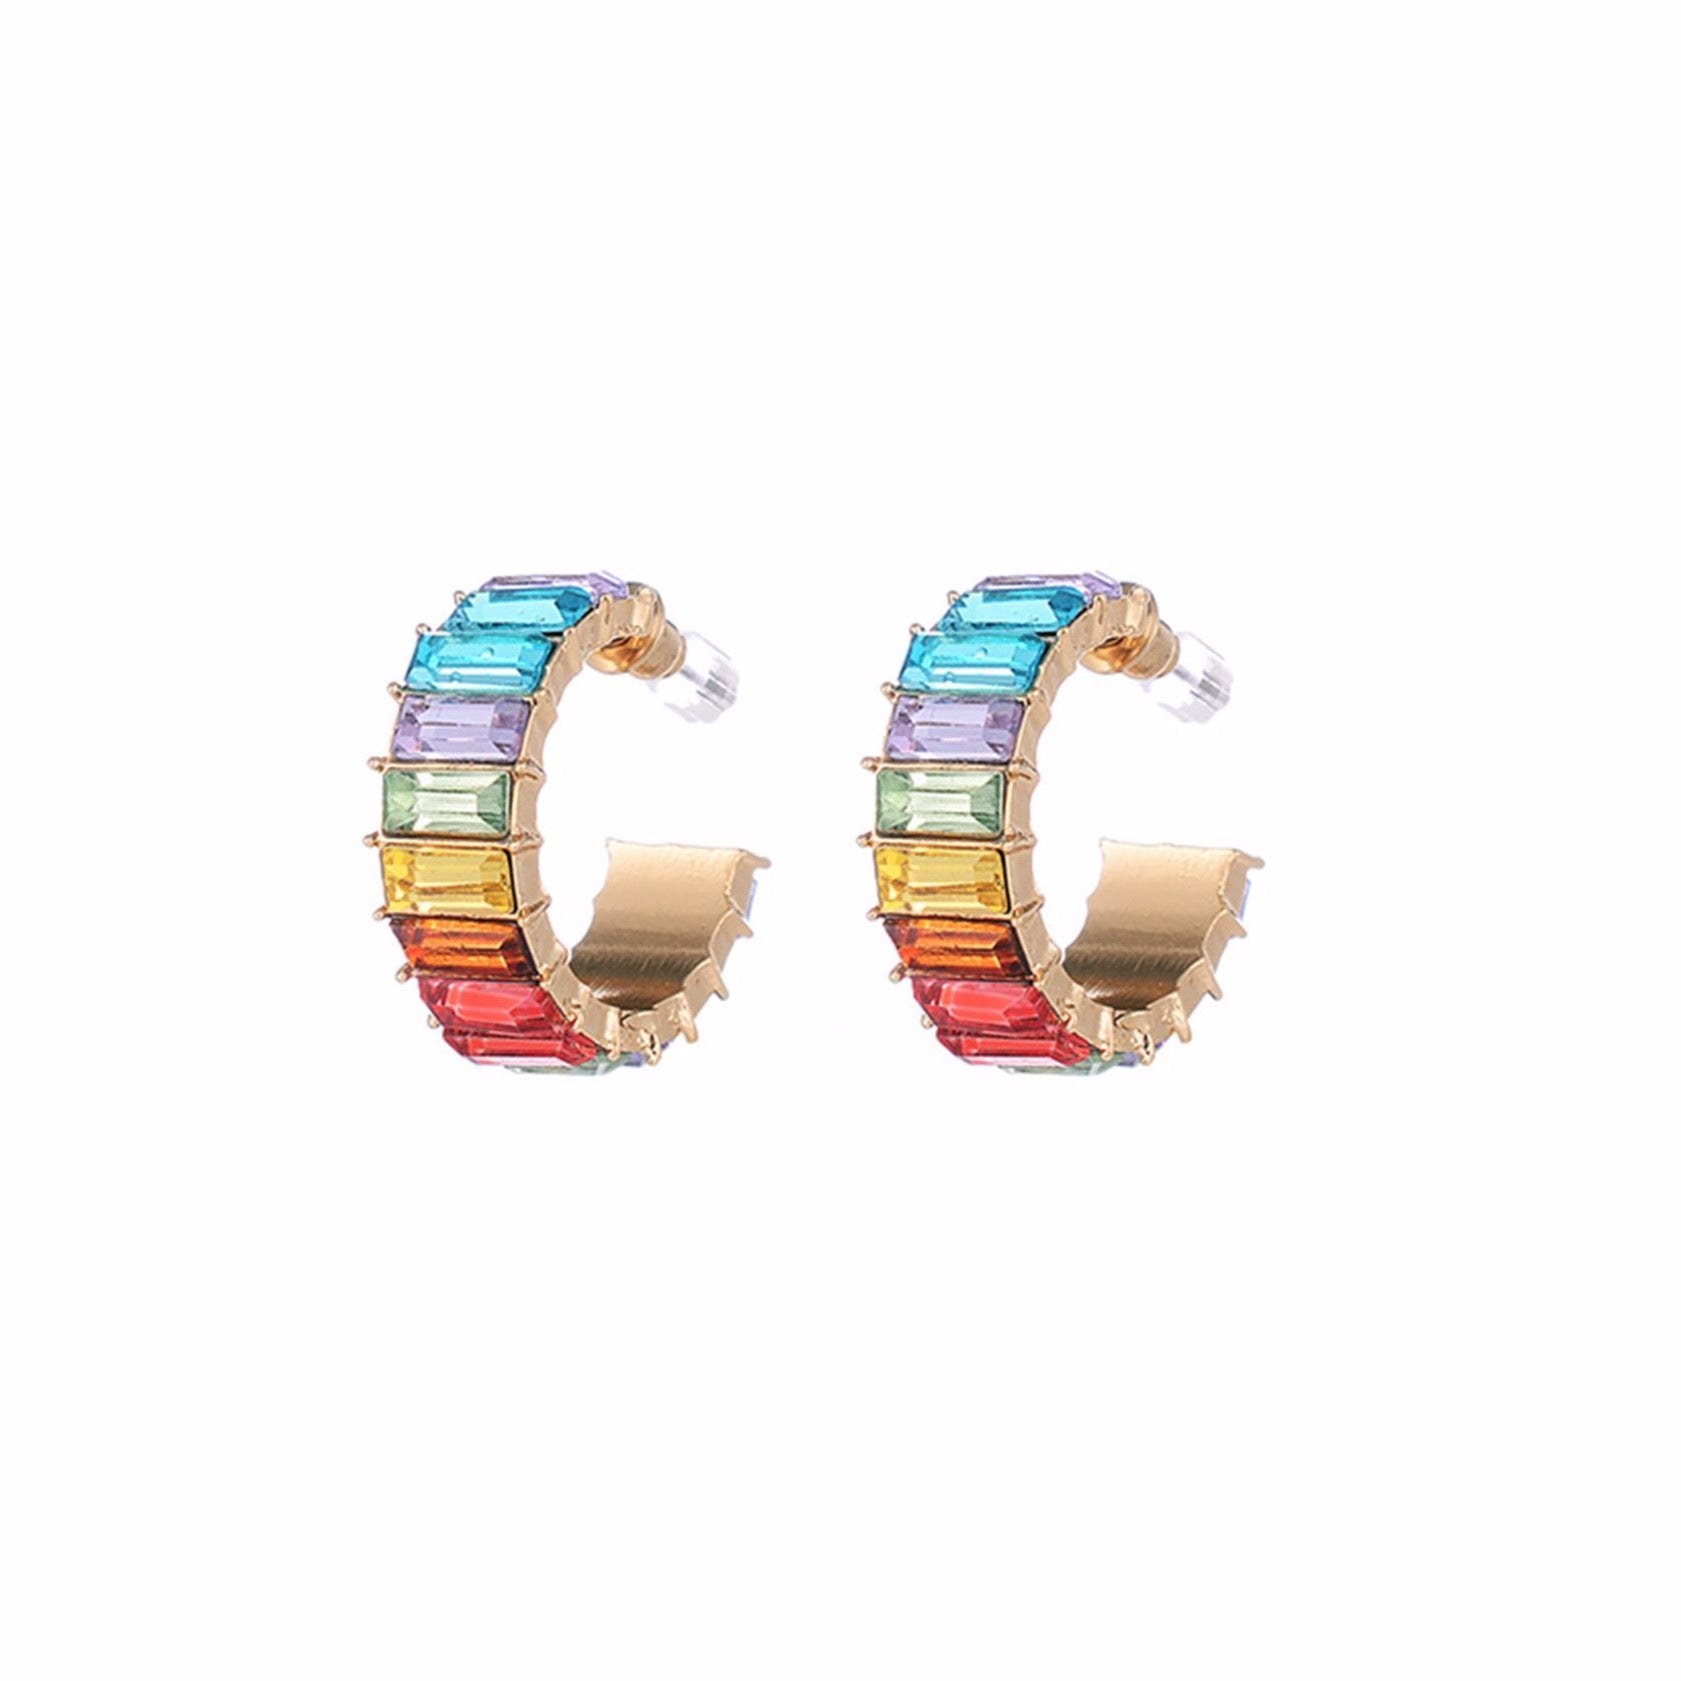 Dazzling rainbow gold tone hoop earrings with multi-colour diamante crystal inlays.